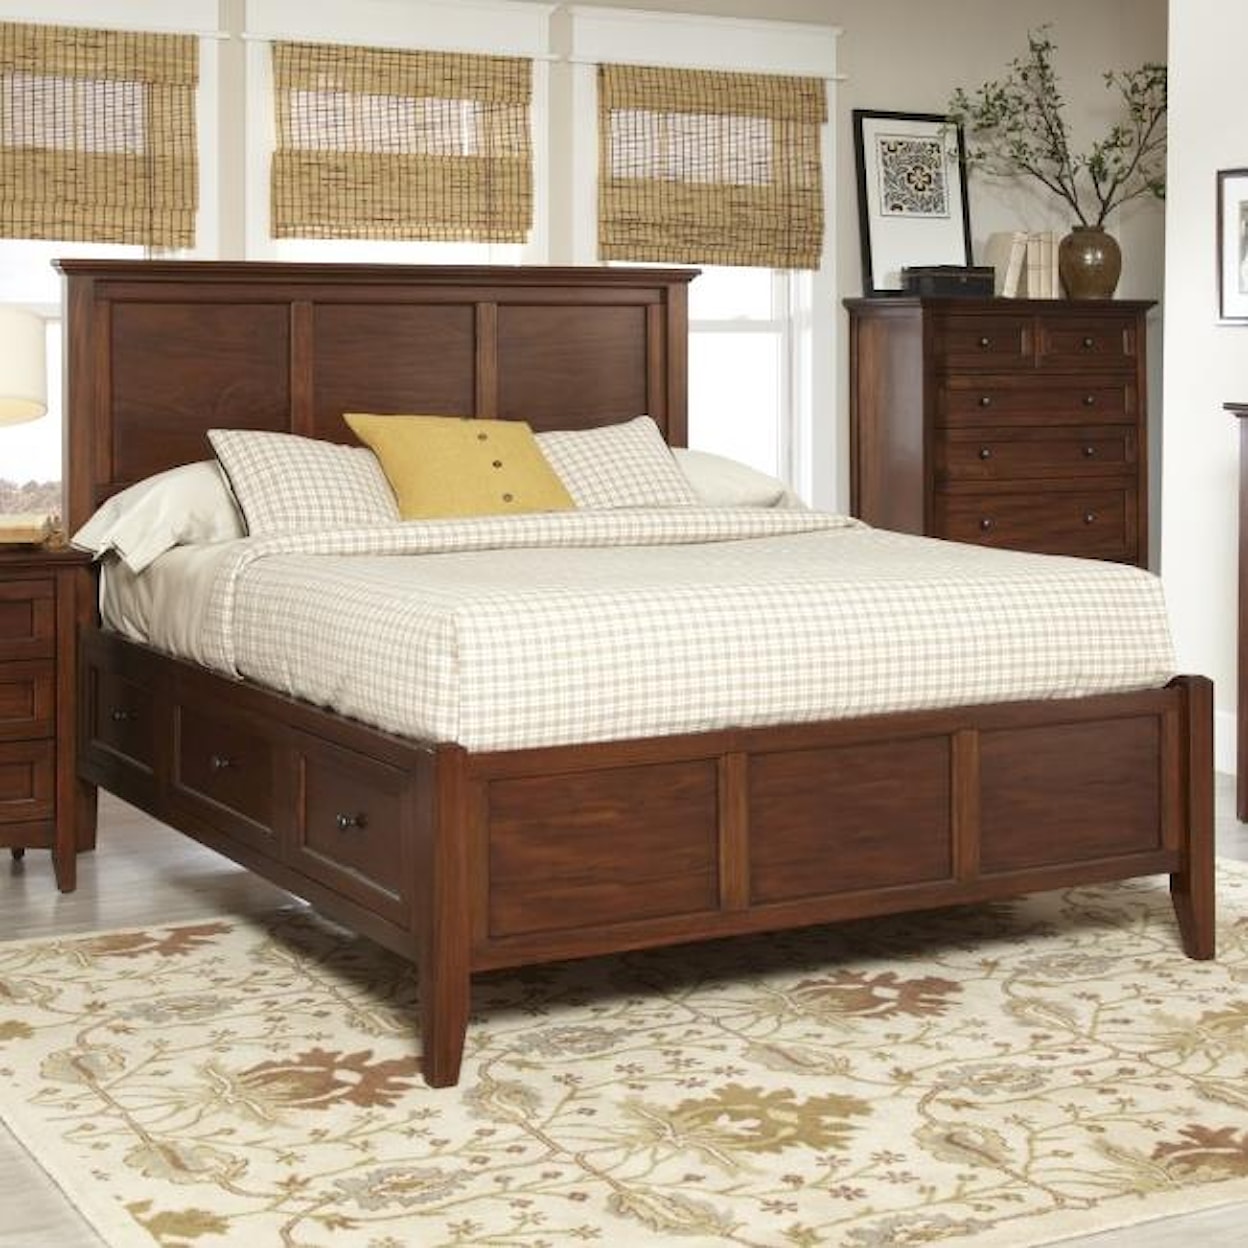 Avalon Furniture Beacon St Queen Panel Bed